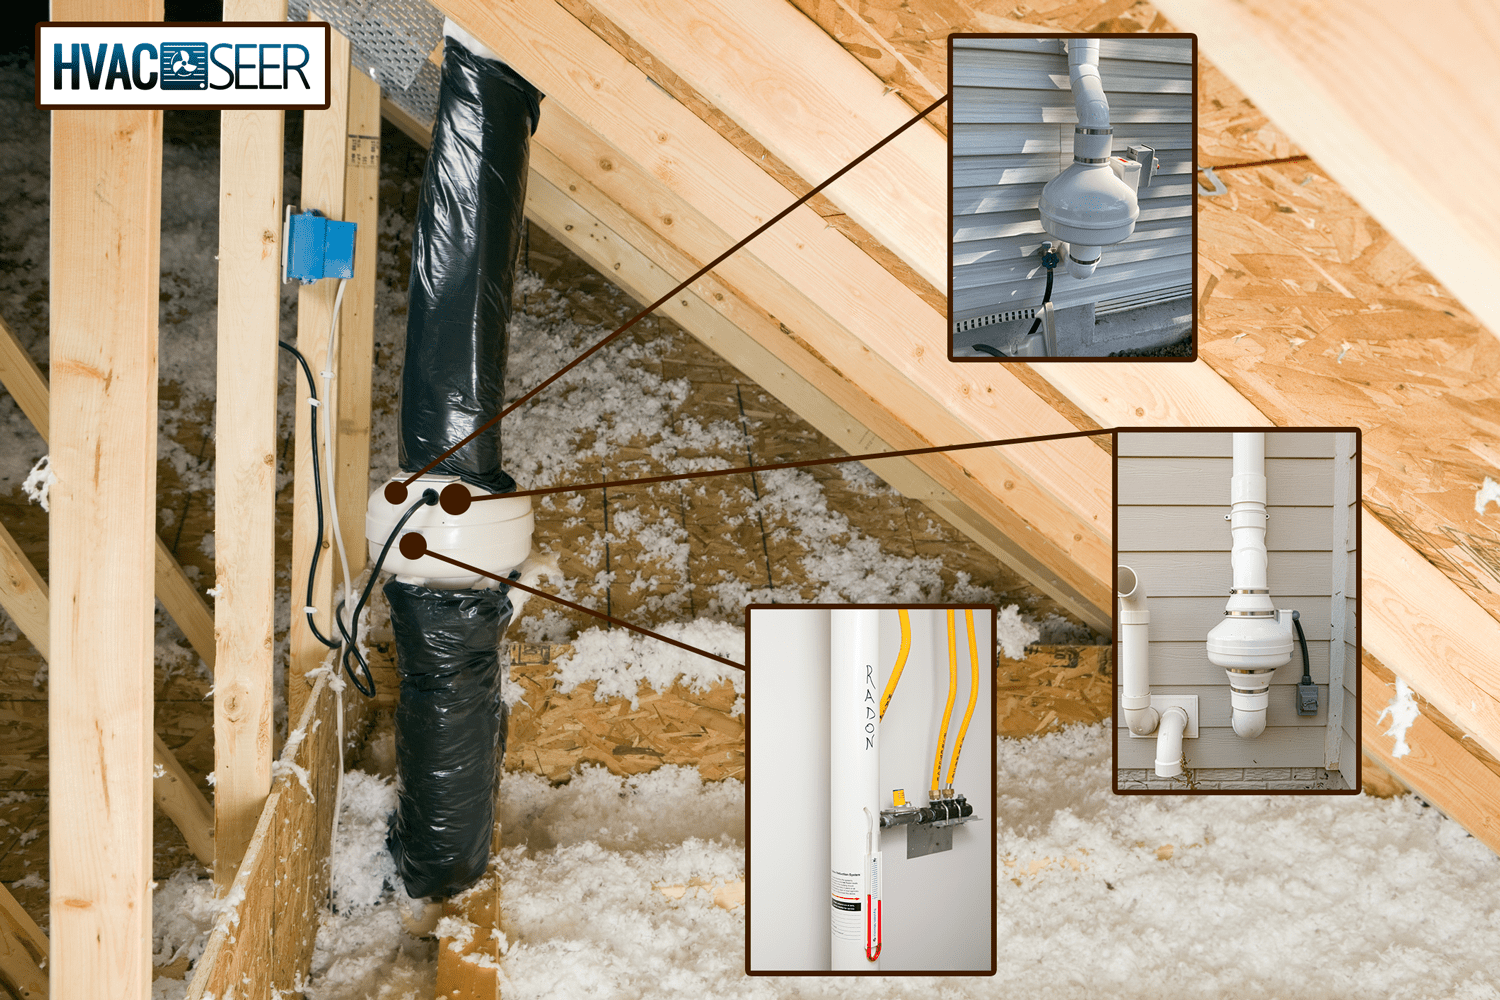 Attic Radon Vent Fan with Roof Trusses and Insulation - Does A Radon Fan Require A Dedicated Circuit